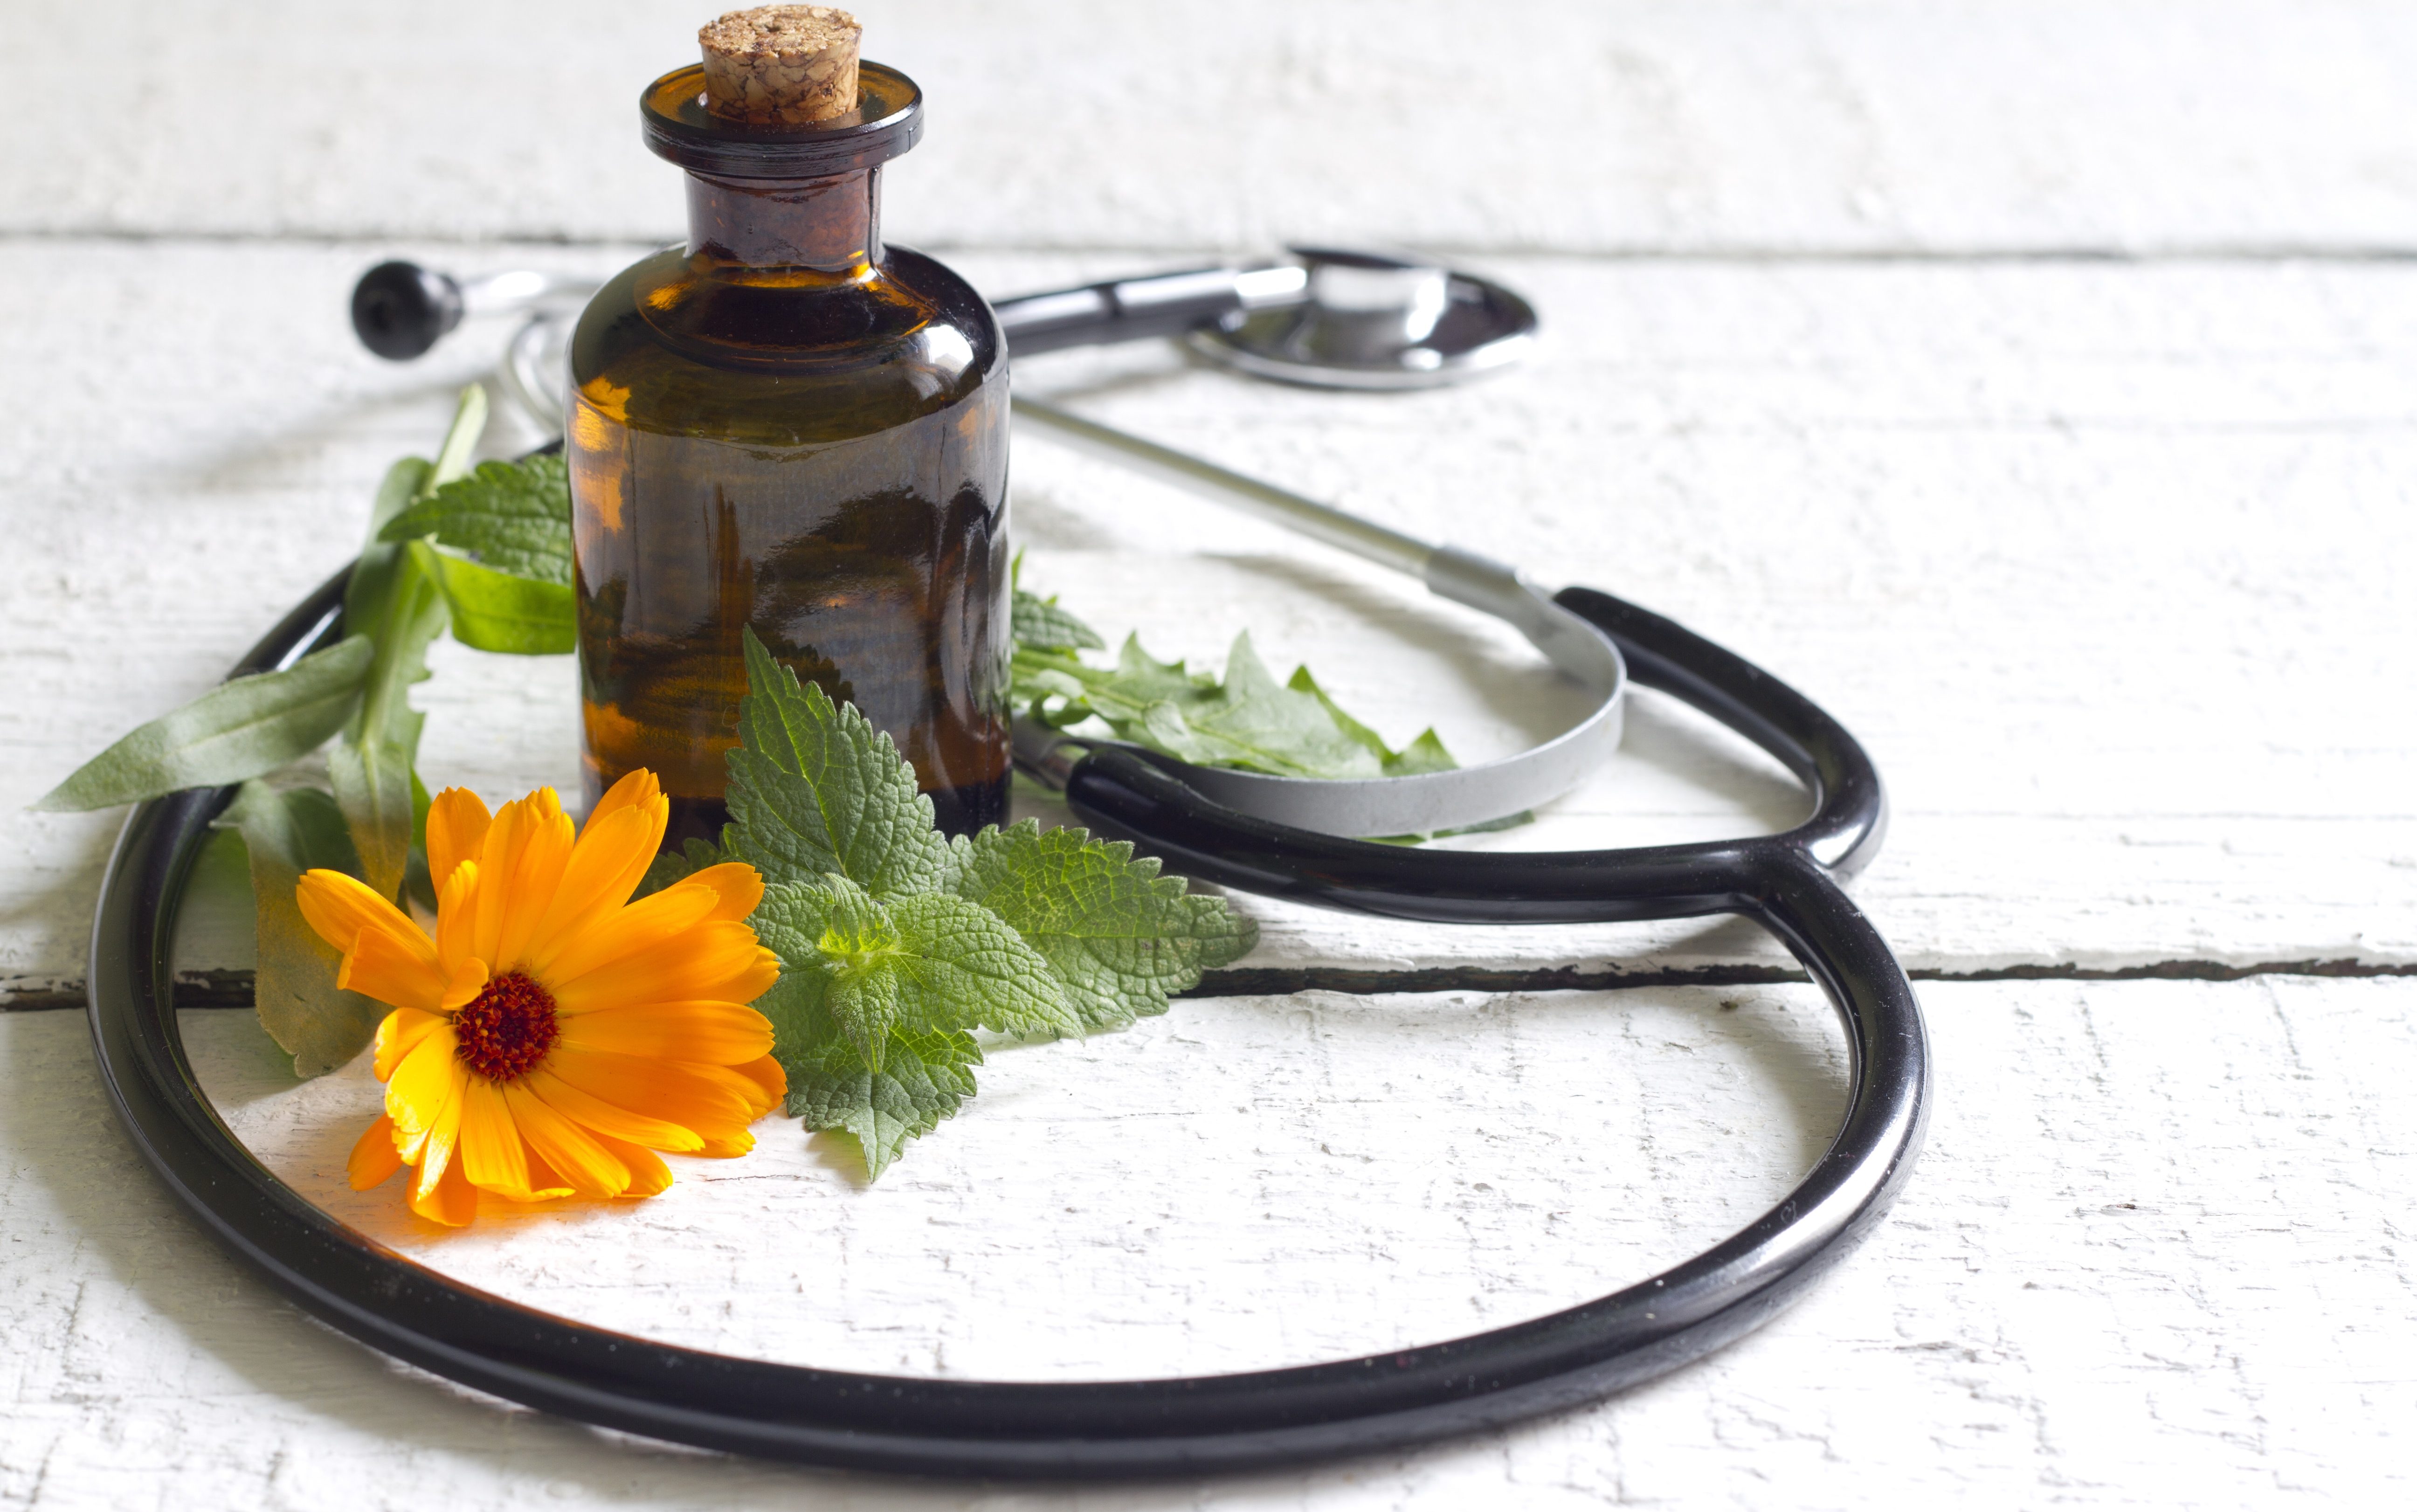 A stethoscope laying on a wooden table with a flower and brown glass jar.